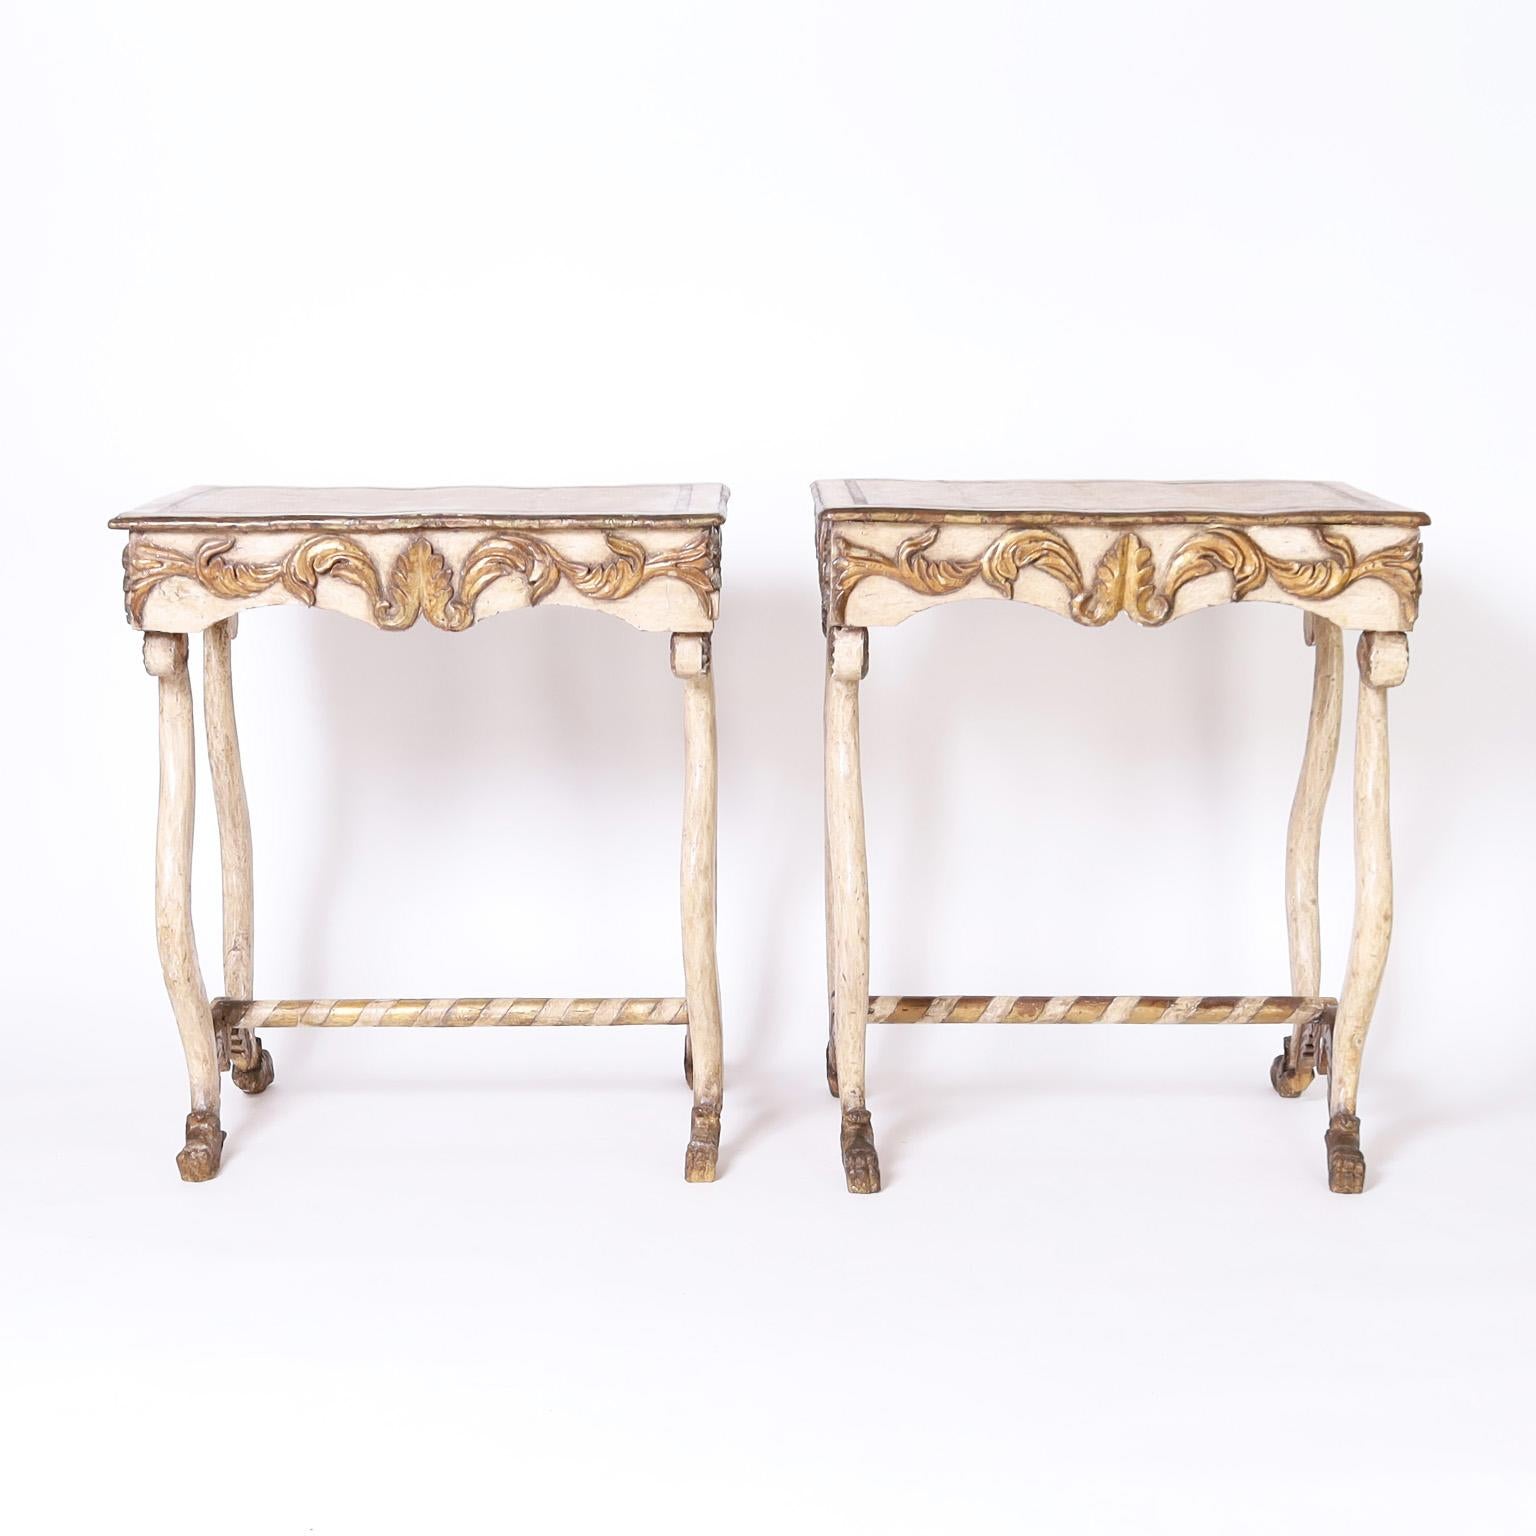 Delightful pair of late 18th or early 19th century Rococo Italian tables or stands crafted in walnut with a dramatic form. Hand carved and joined then painted, now fly specked, over gesso with gilt highlights.